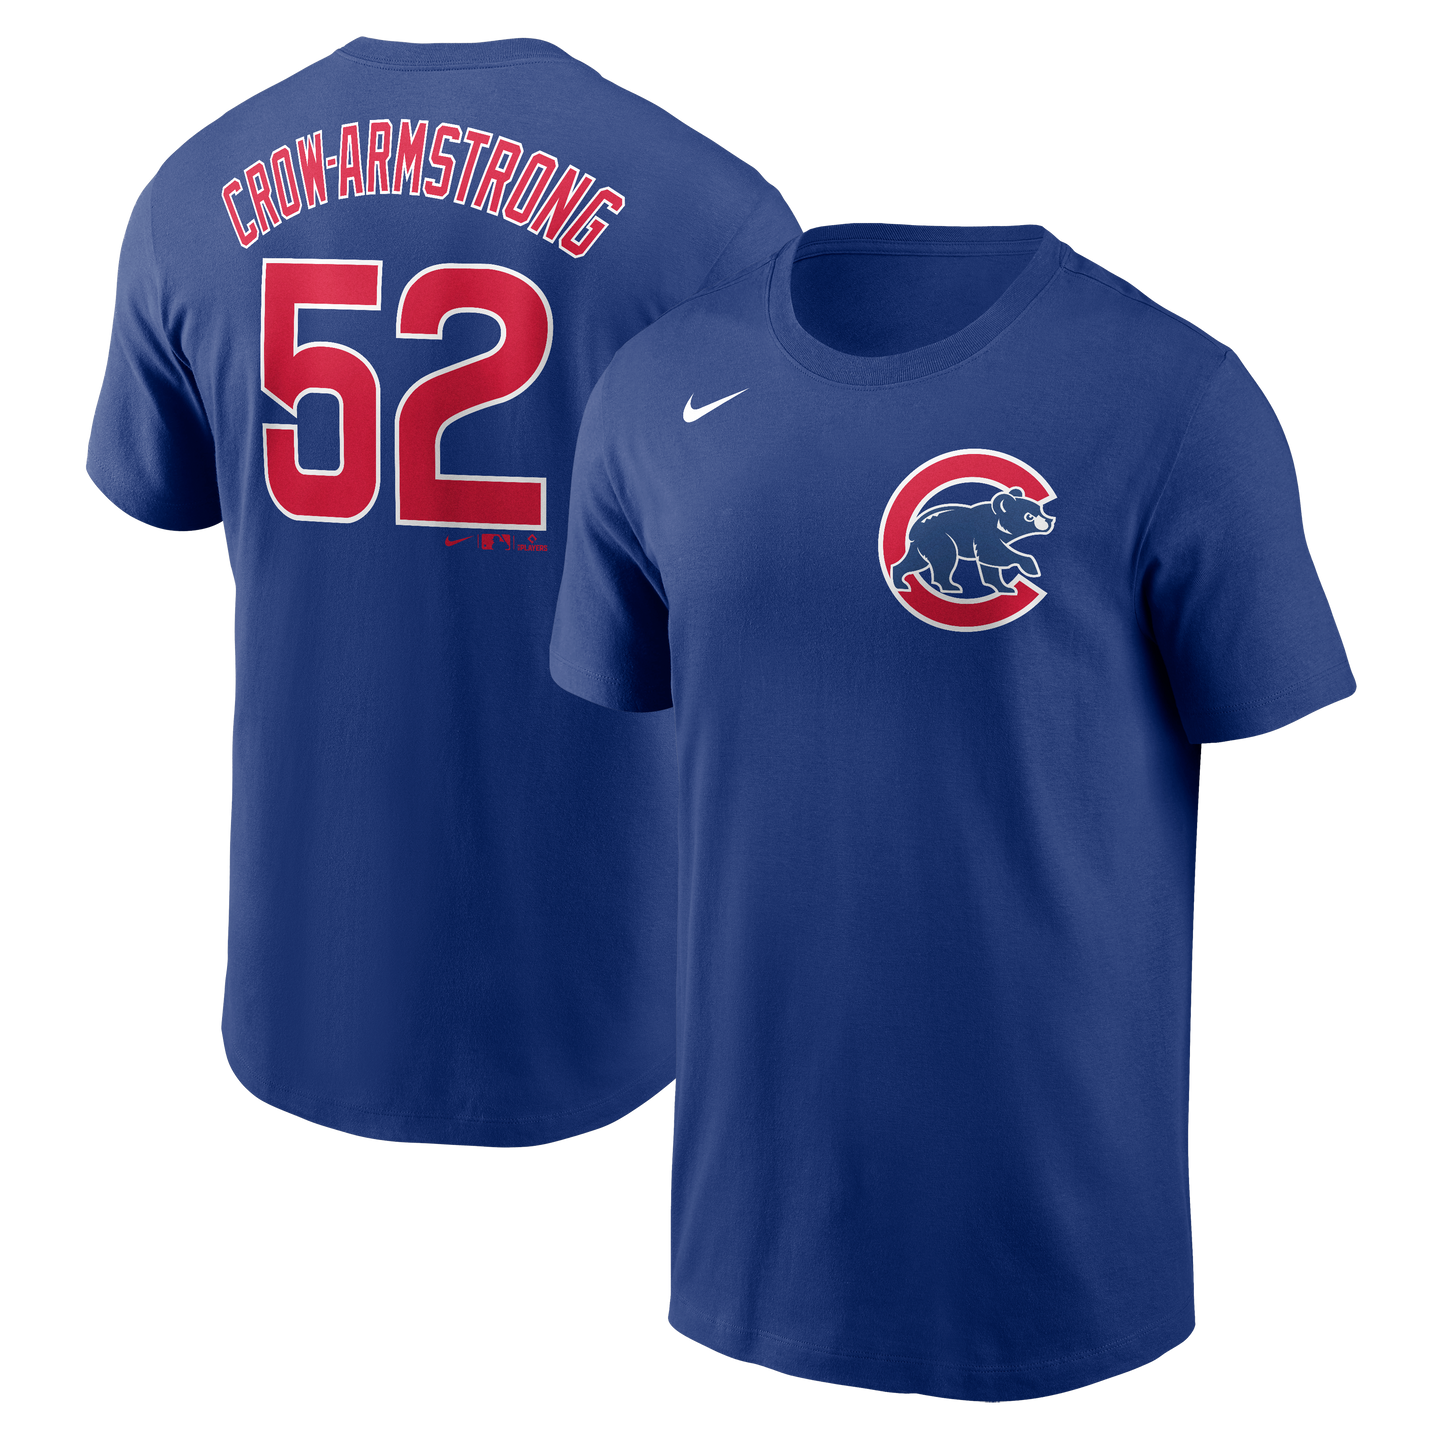 Pete Crow-Armstrong Chicago Cubs Nike Name & Number T-Shirt – Clark ...